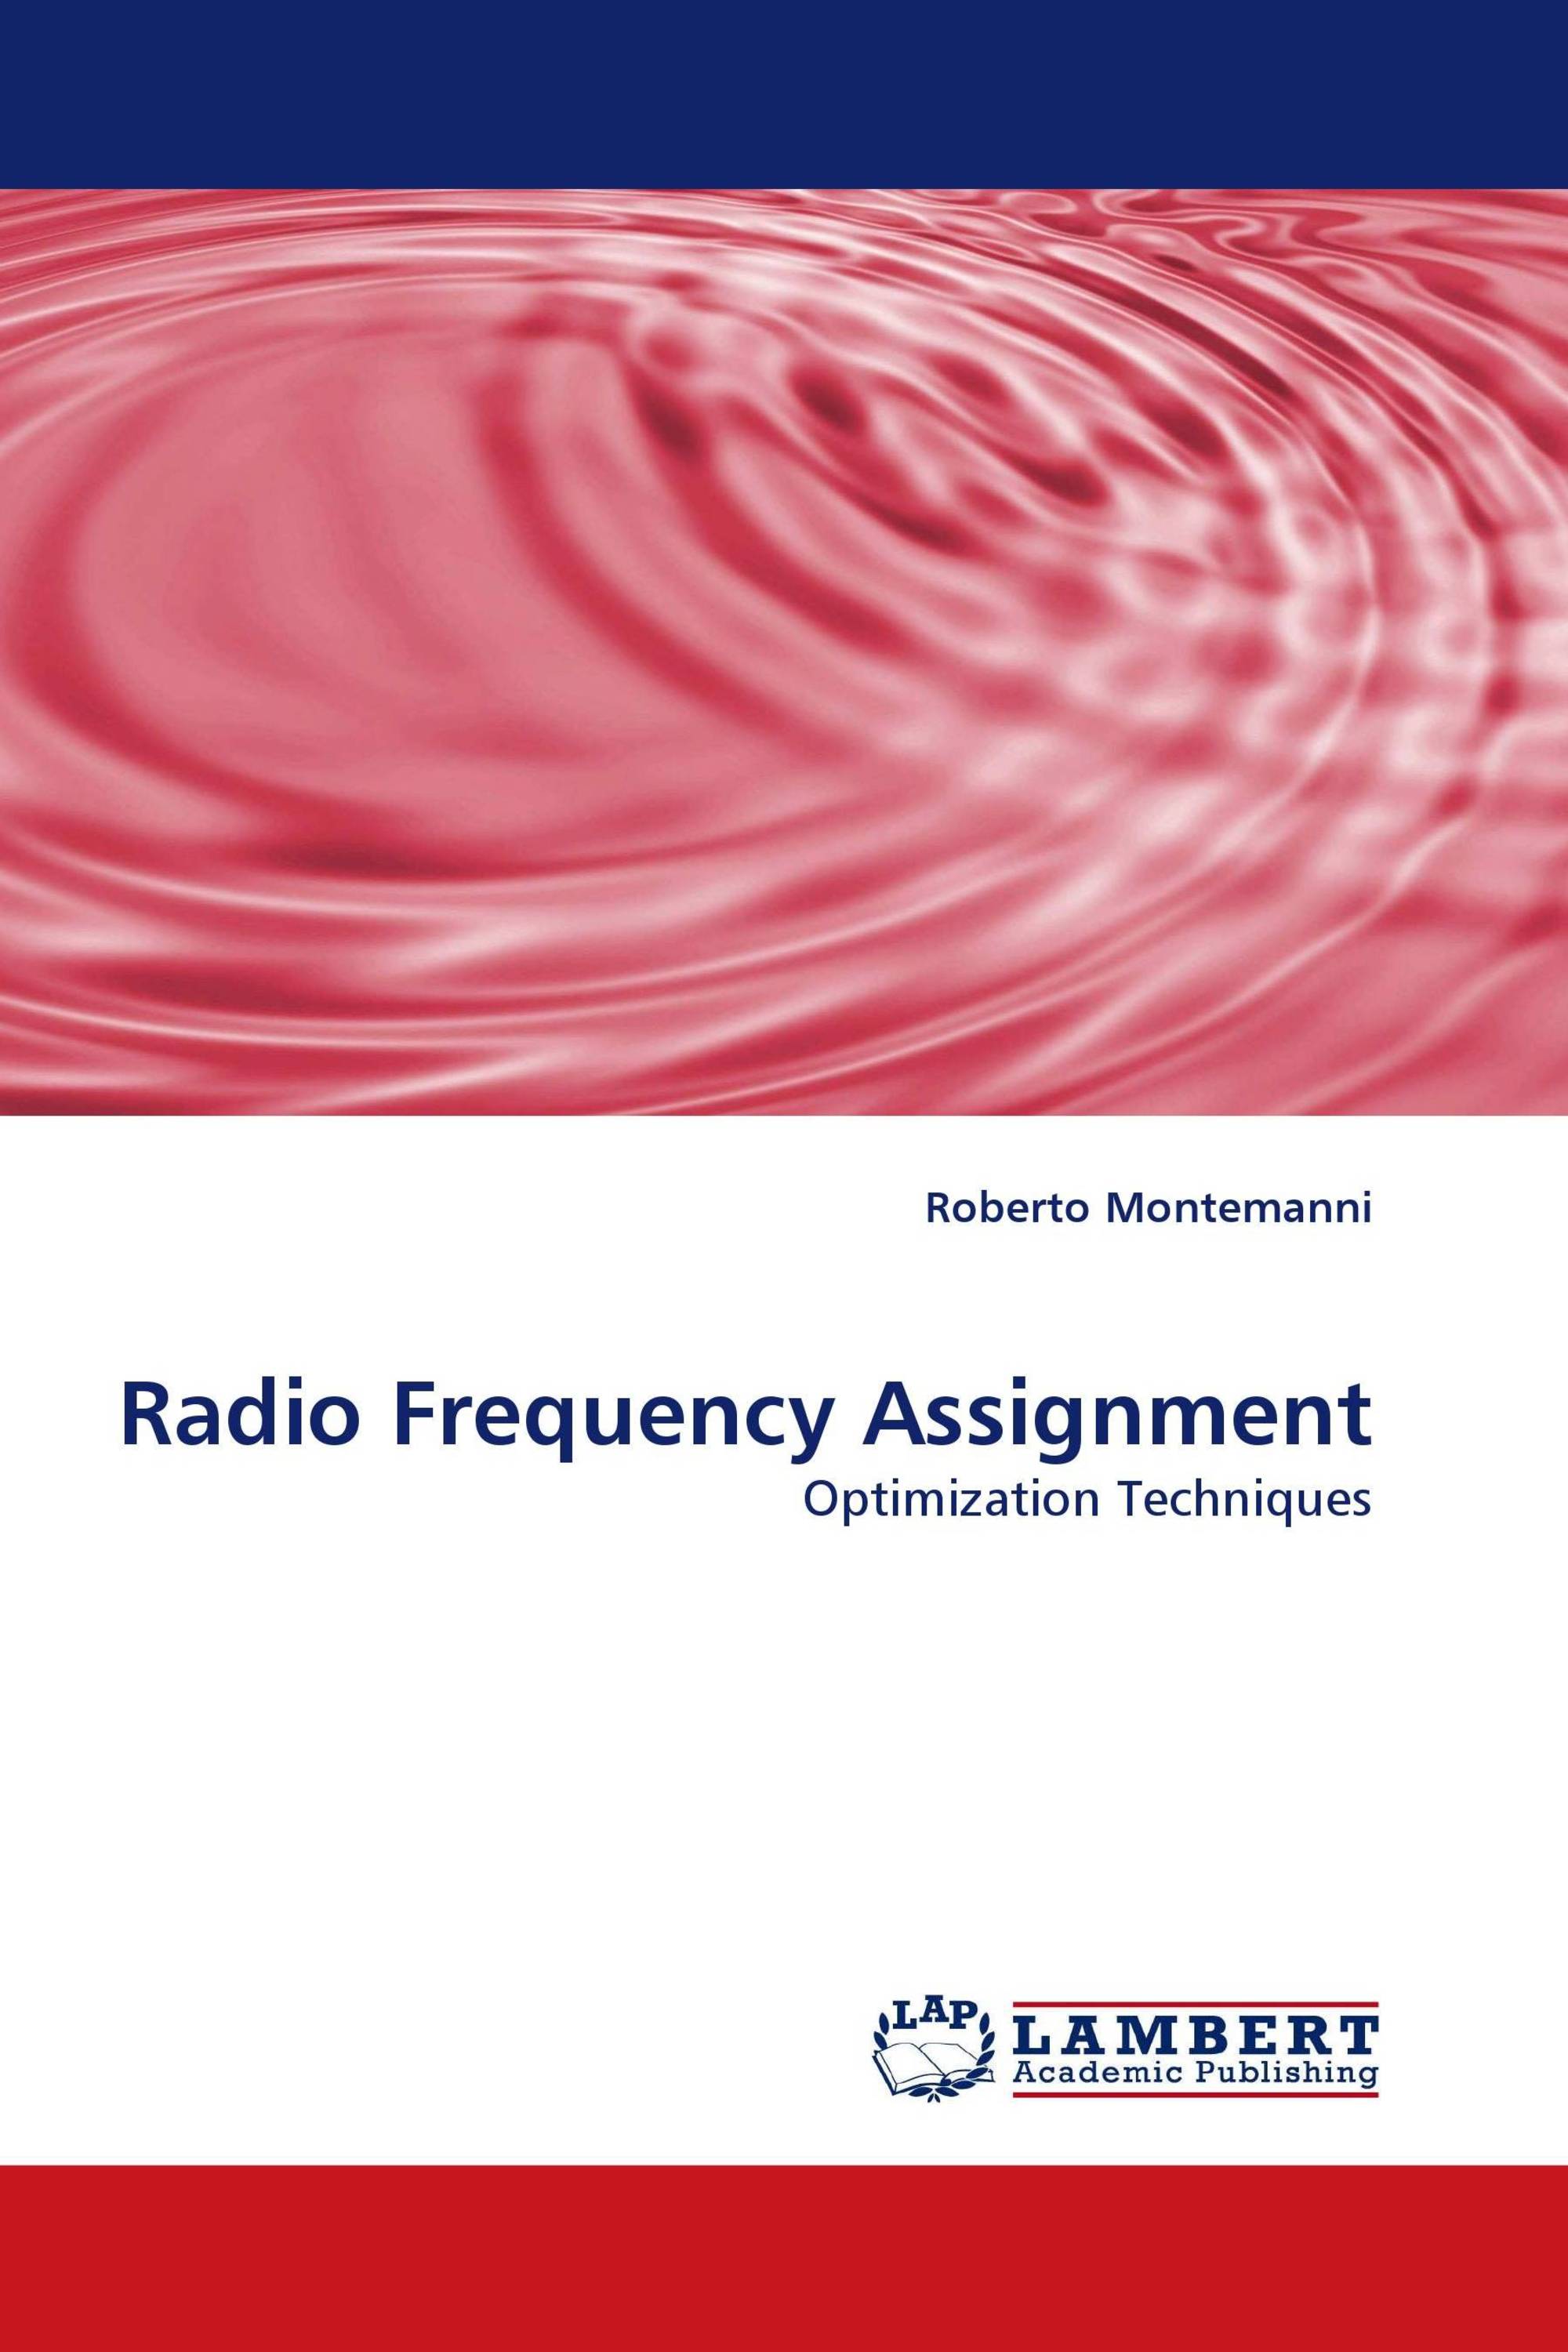 problem of radio frequency assignment